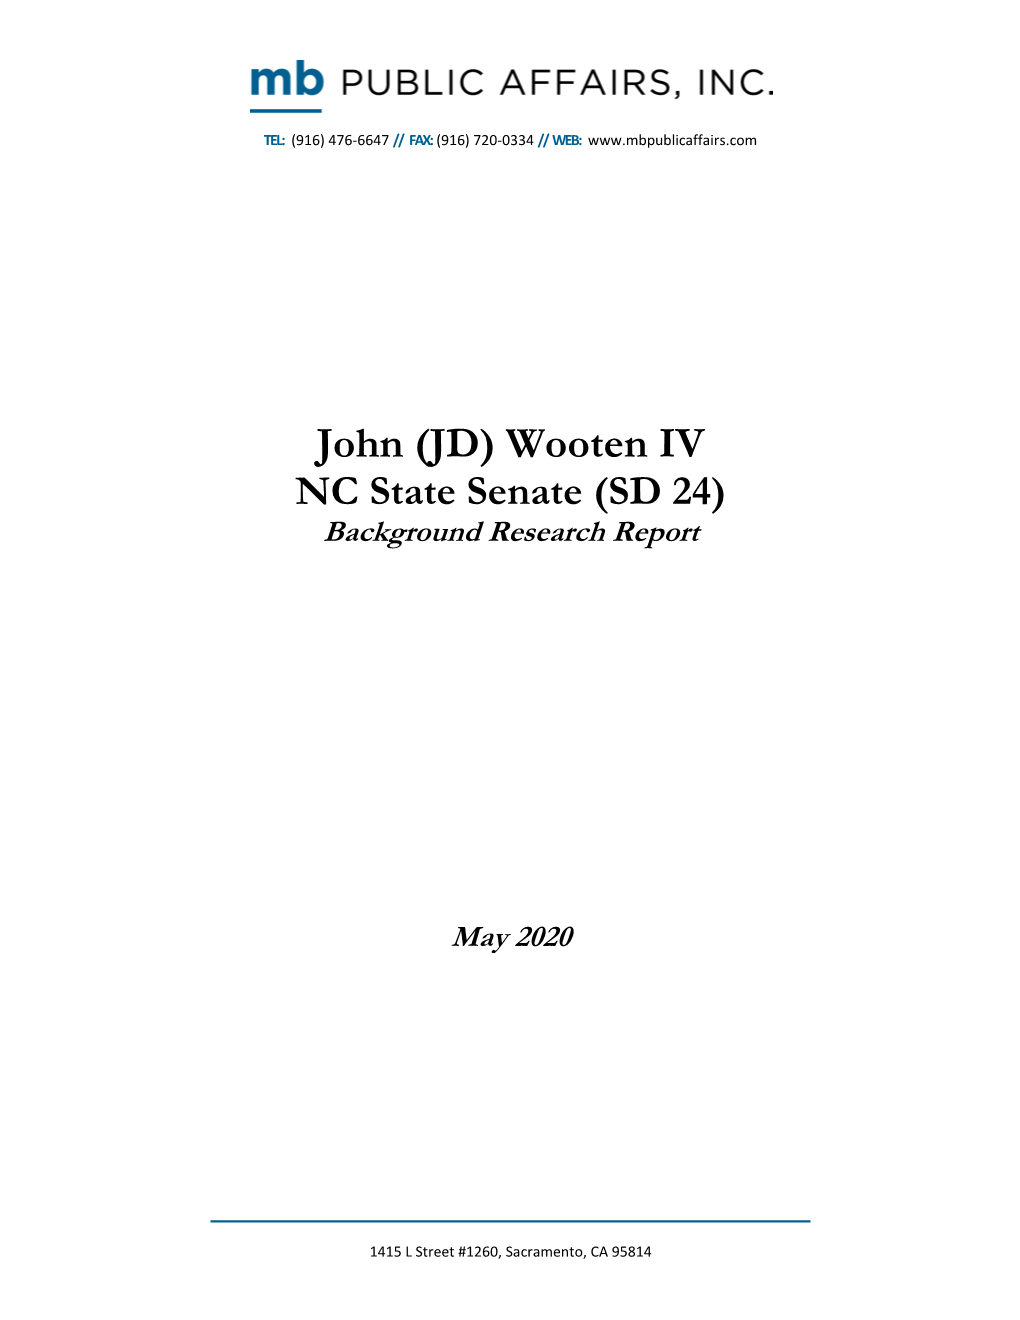 (JD) Wooten IV NC State Senate (SD 24) Background Research Report